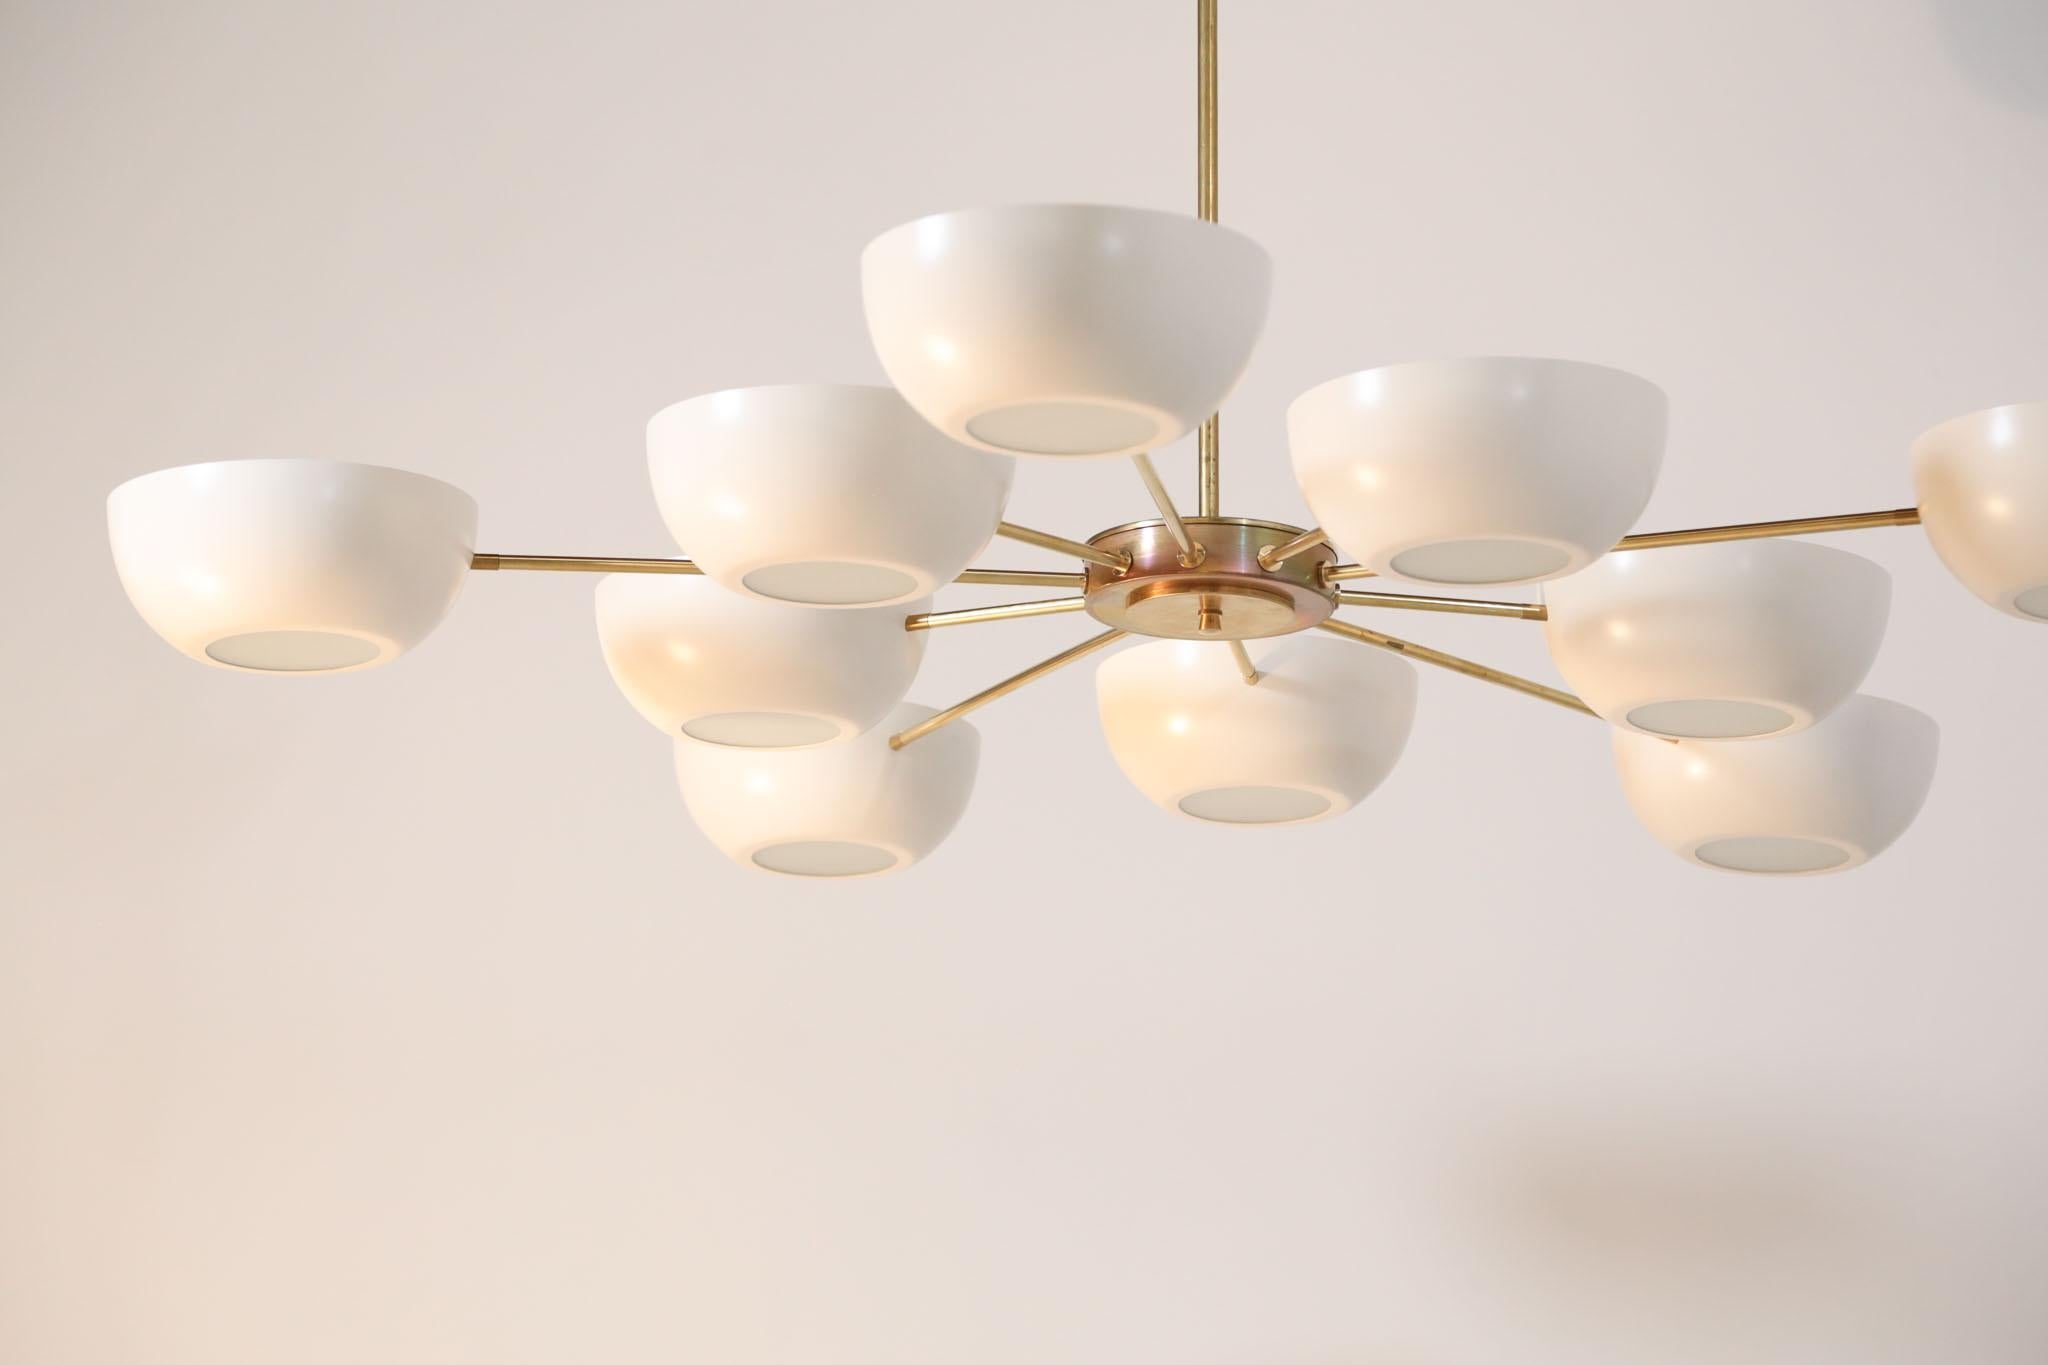 Large Italian Modern Chandelier with 10 Arms in Gino Sarfatti Style 